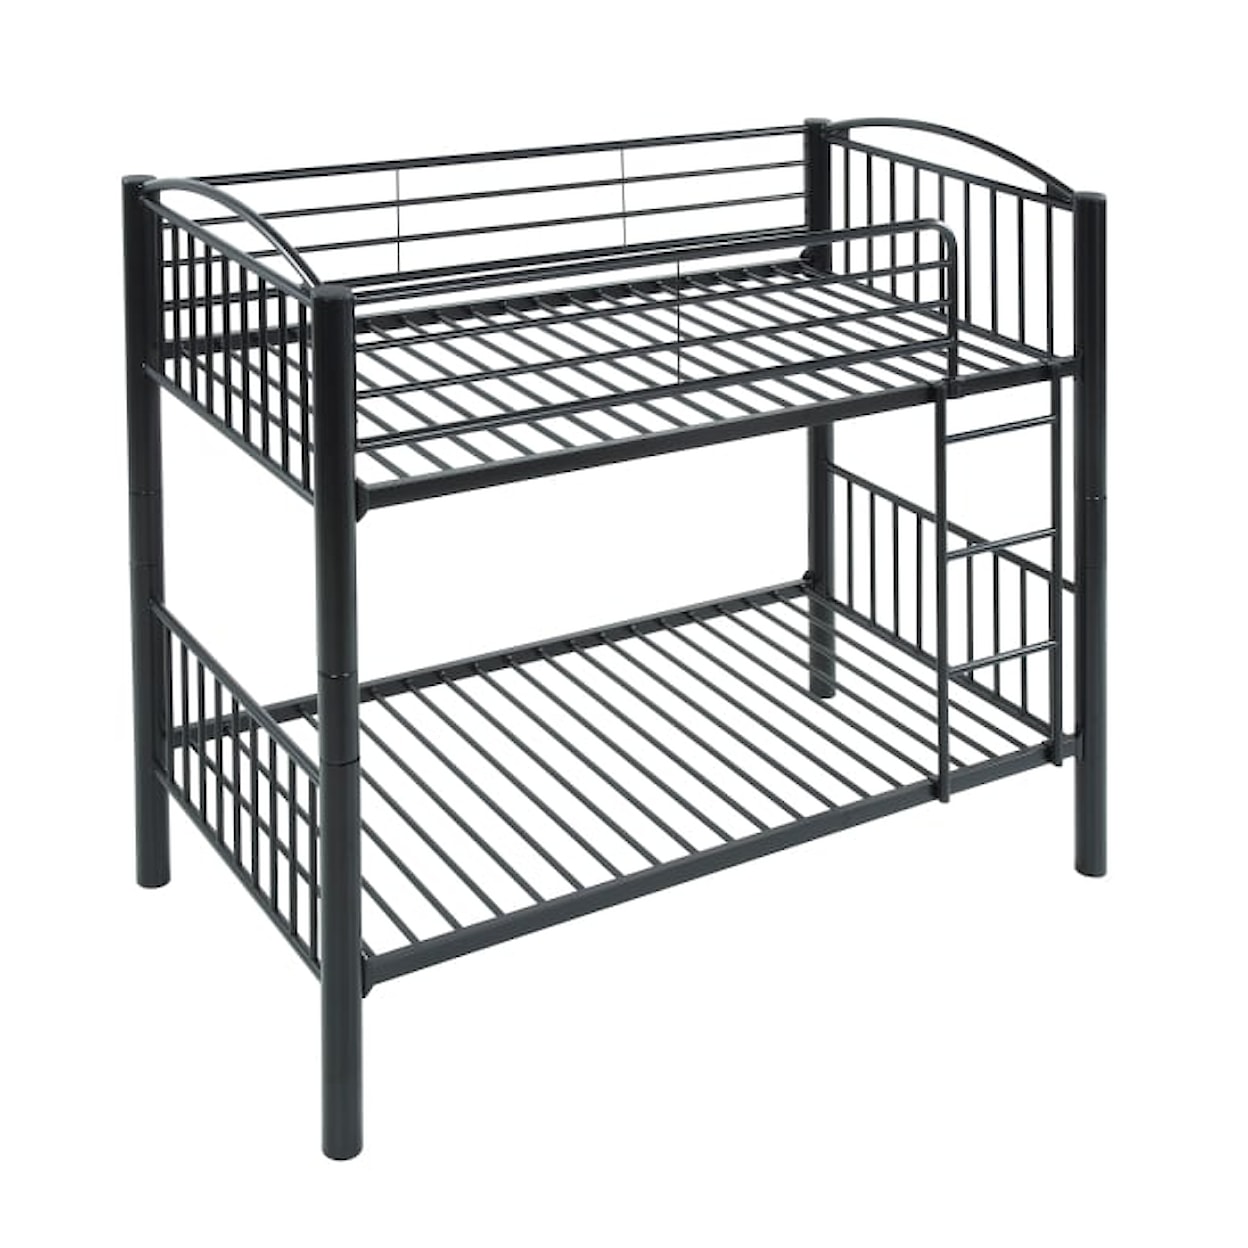 Homelegance Miscellaneous Twin Bunk Bed